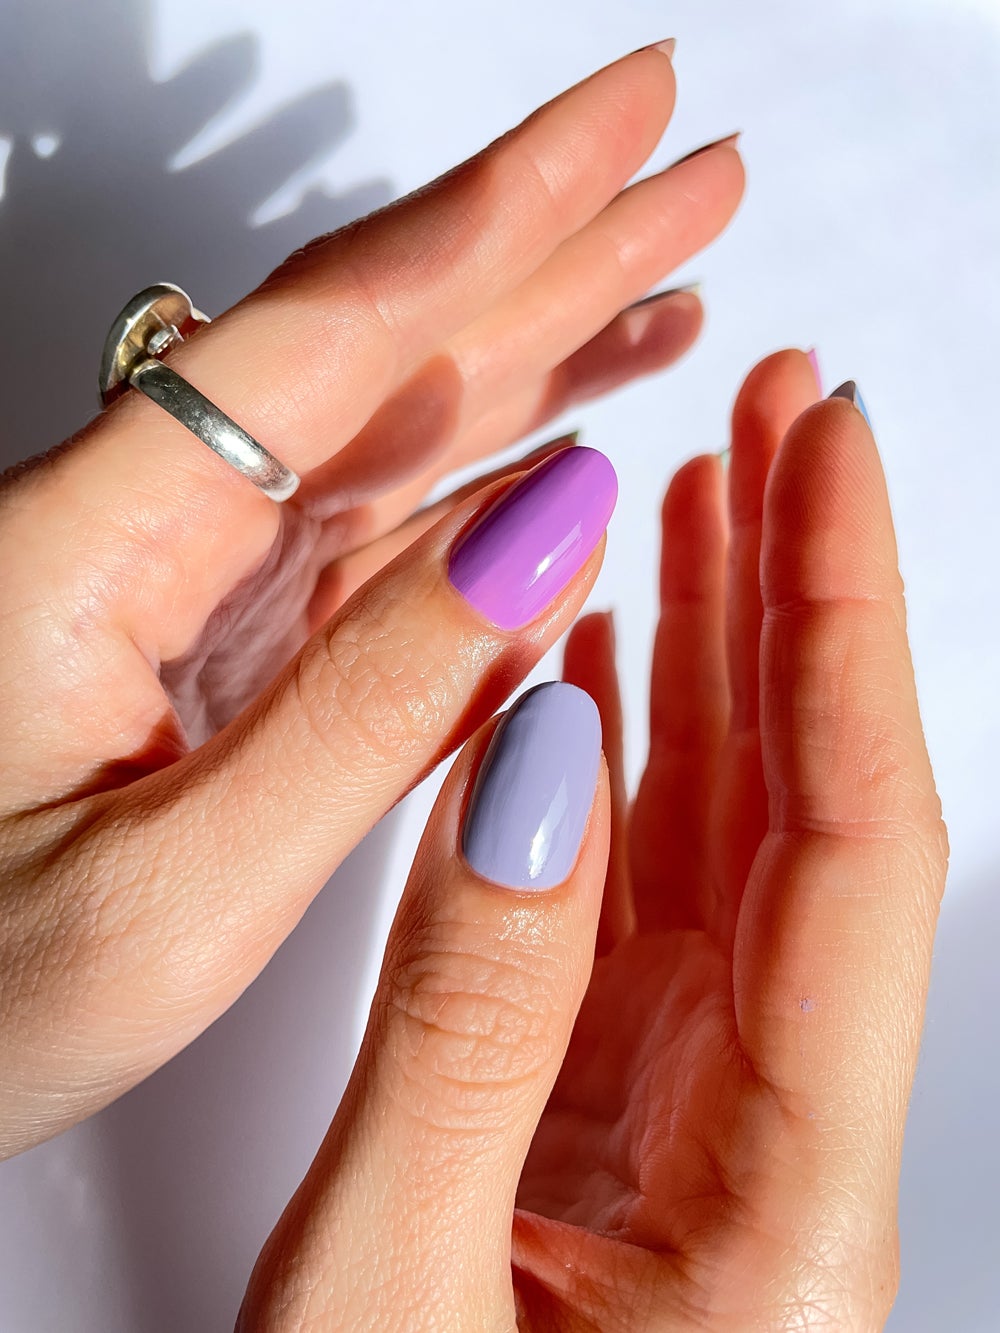 Everything You Need to Know About Jelly Nail Polishes